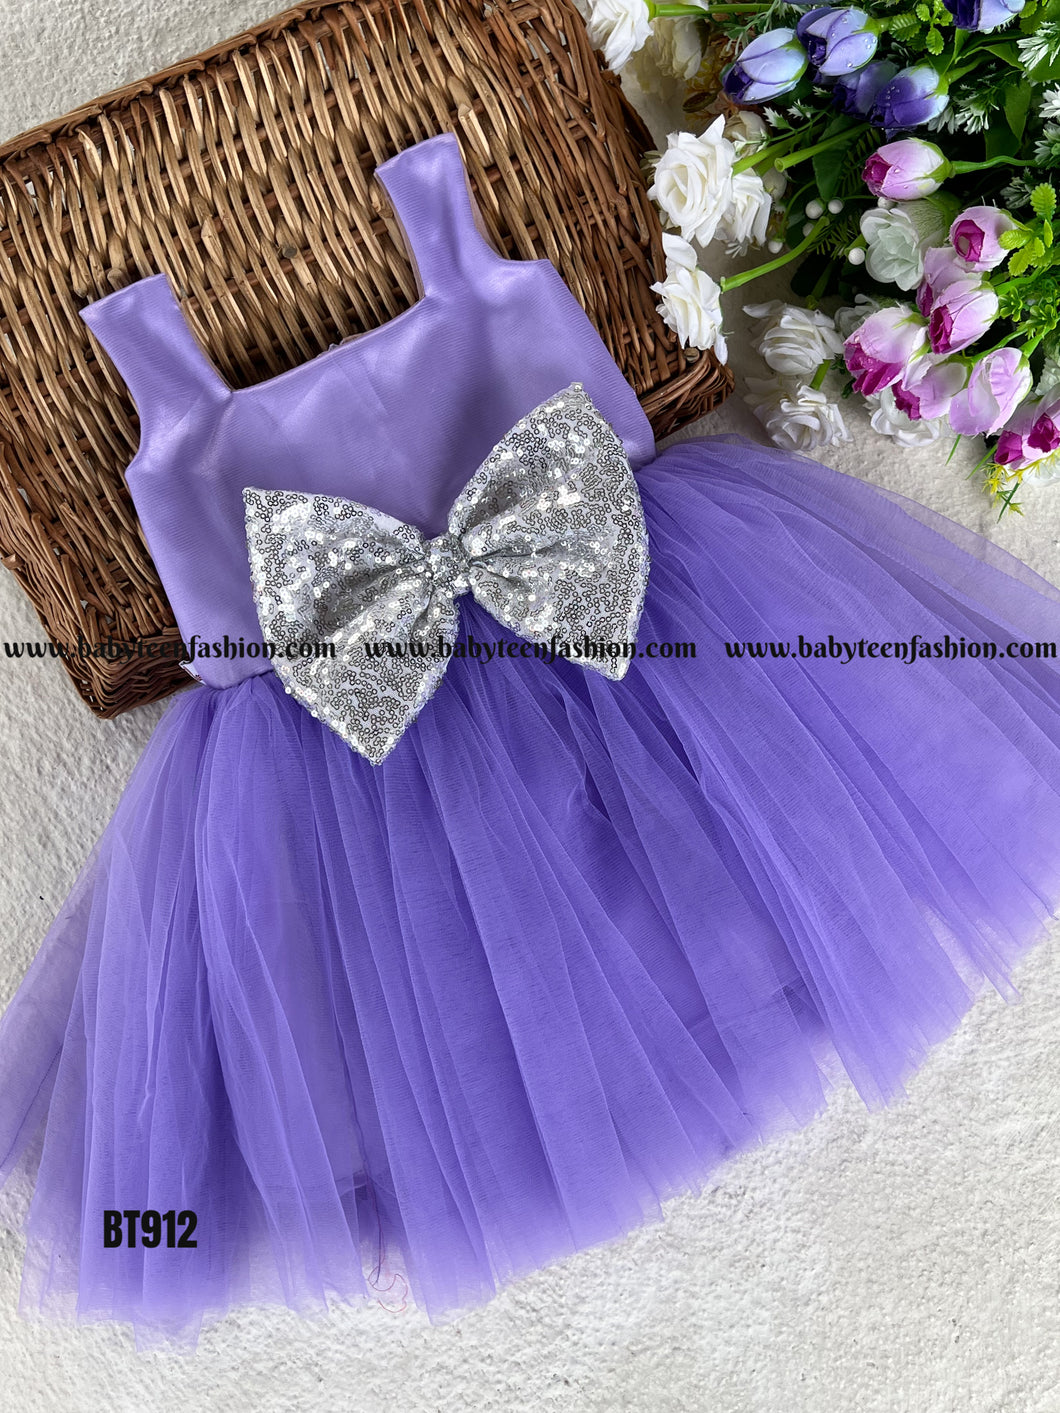 BT912 Lilac Glitter Bow Dress - Sparkle in Every Spin